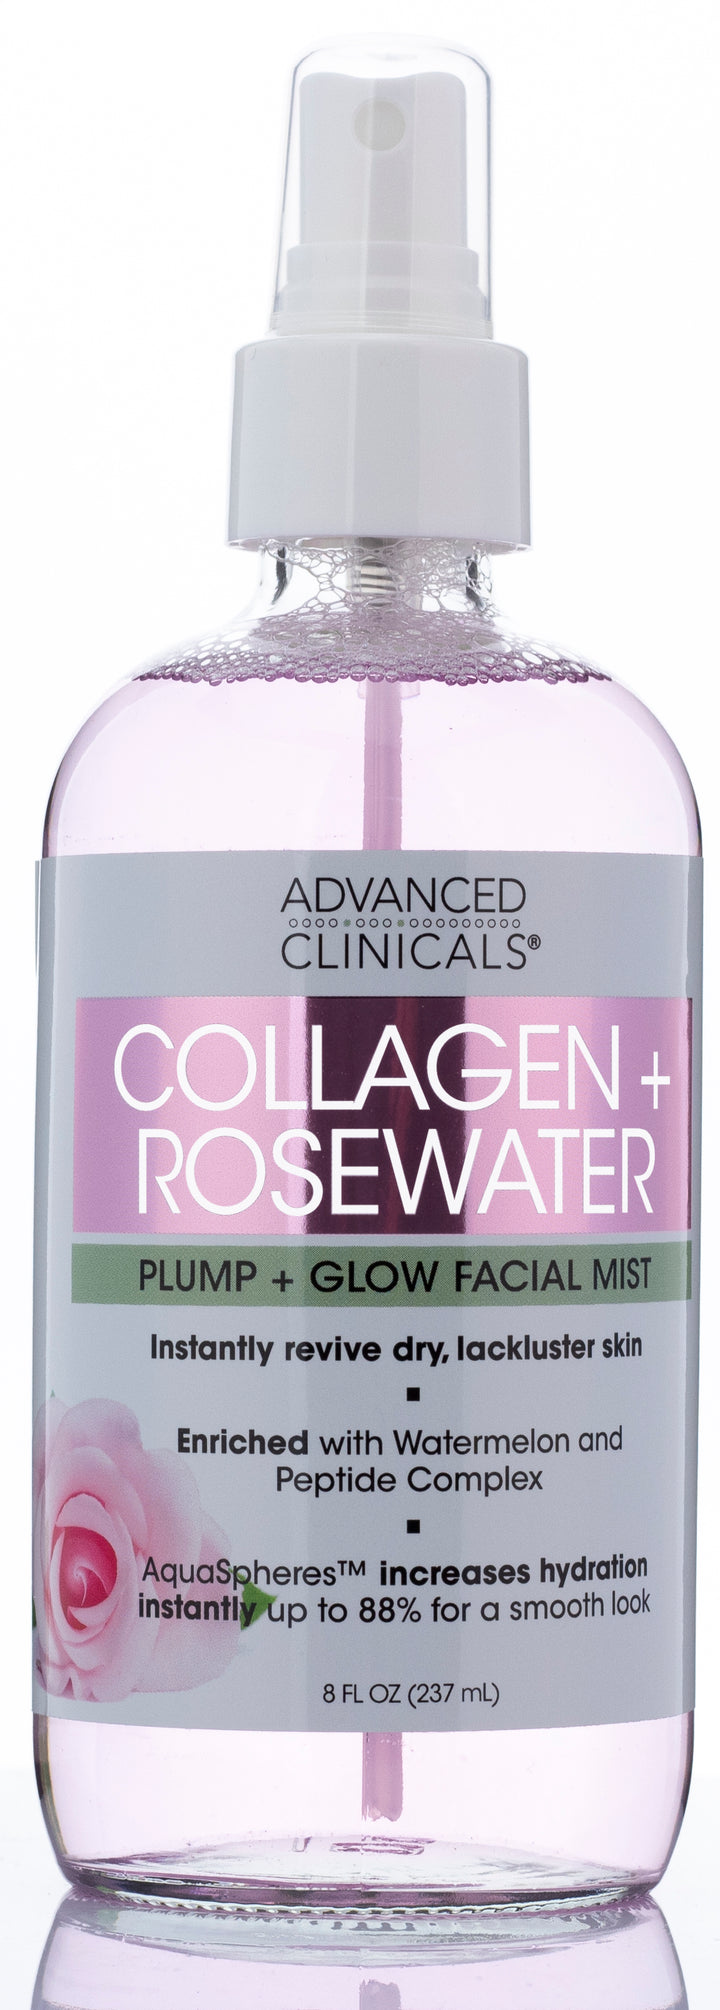 Advanced Clinicals Collagen + Rosewater Facial Mist 8 Fl Oz - Pure Valley 